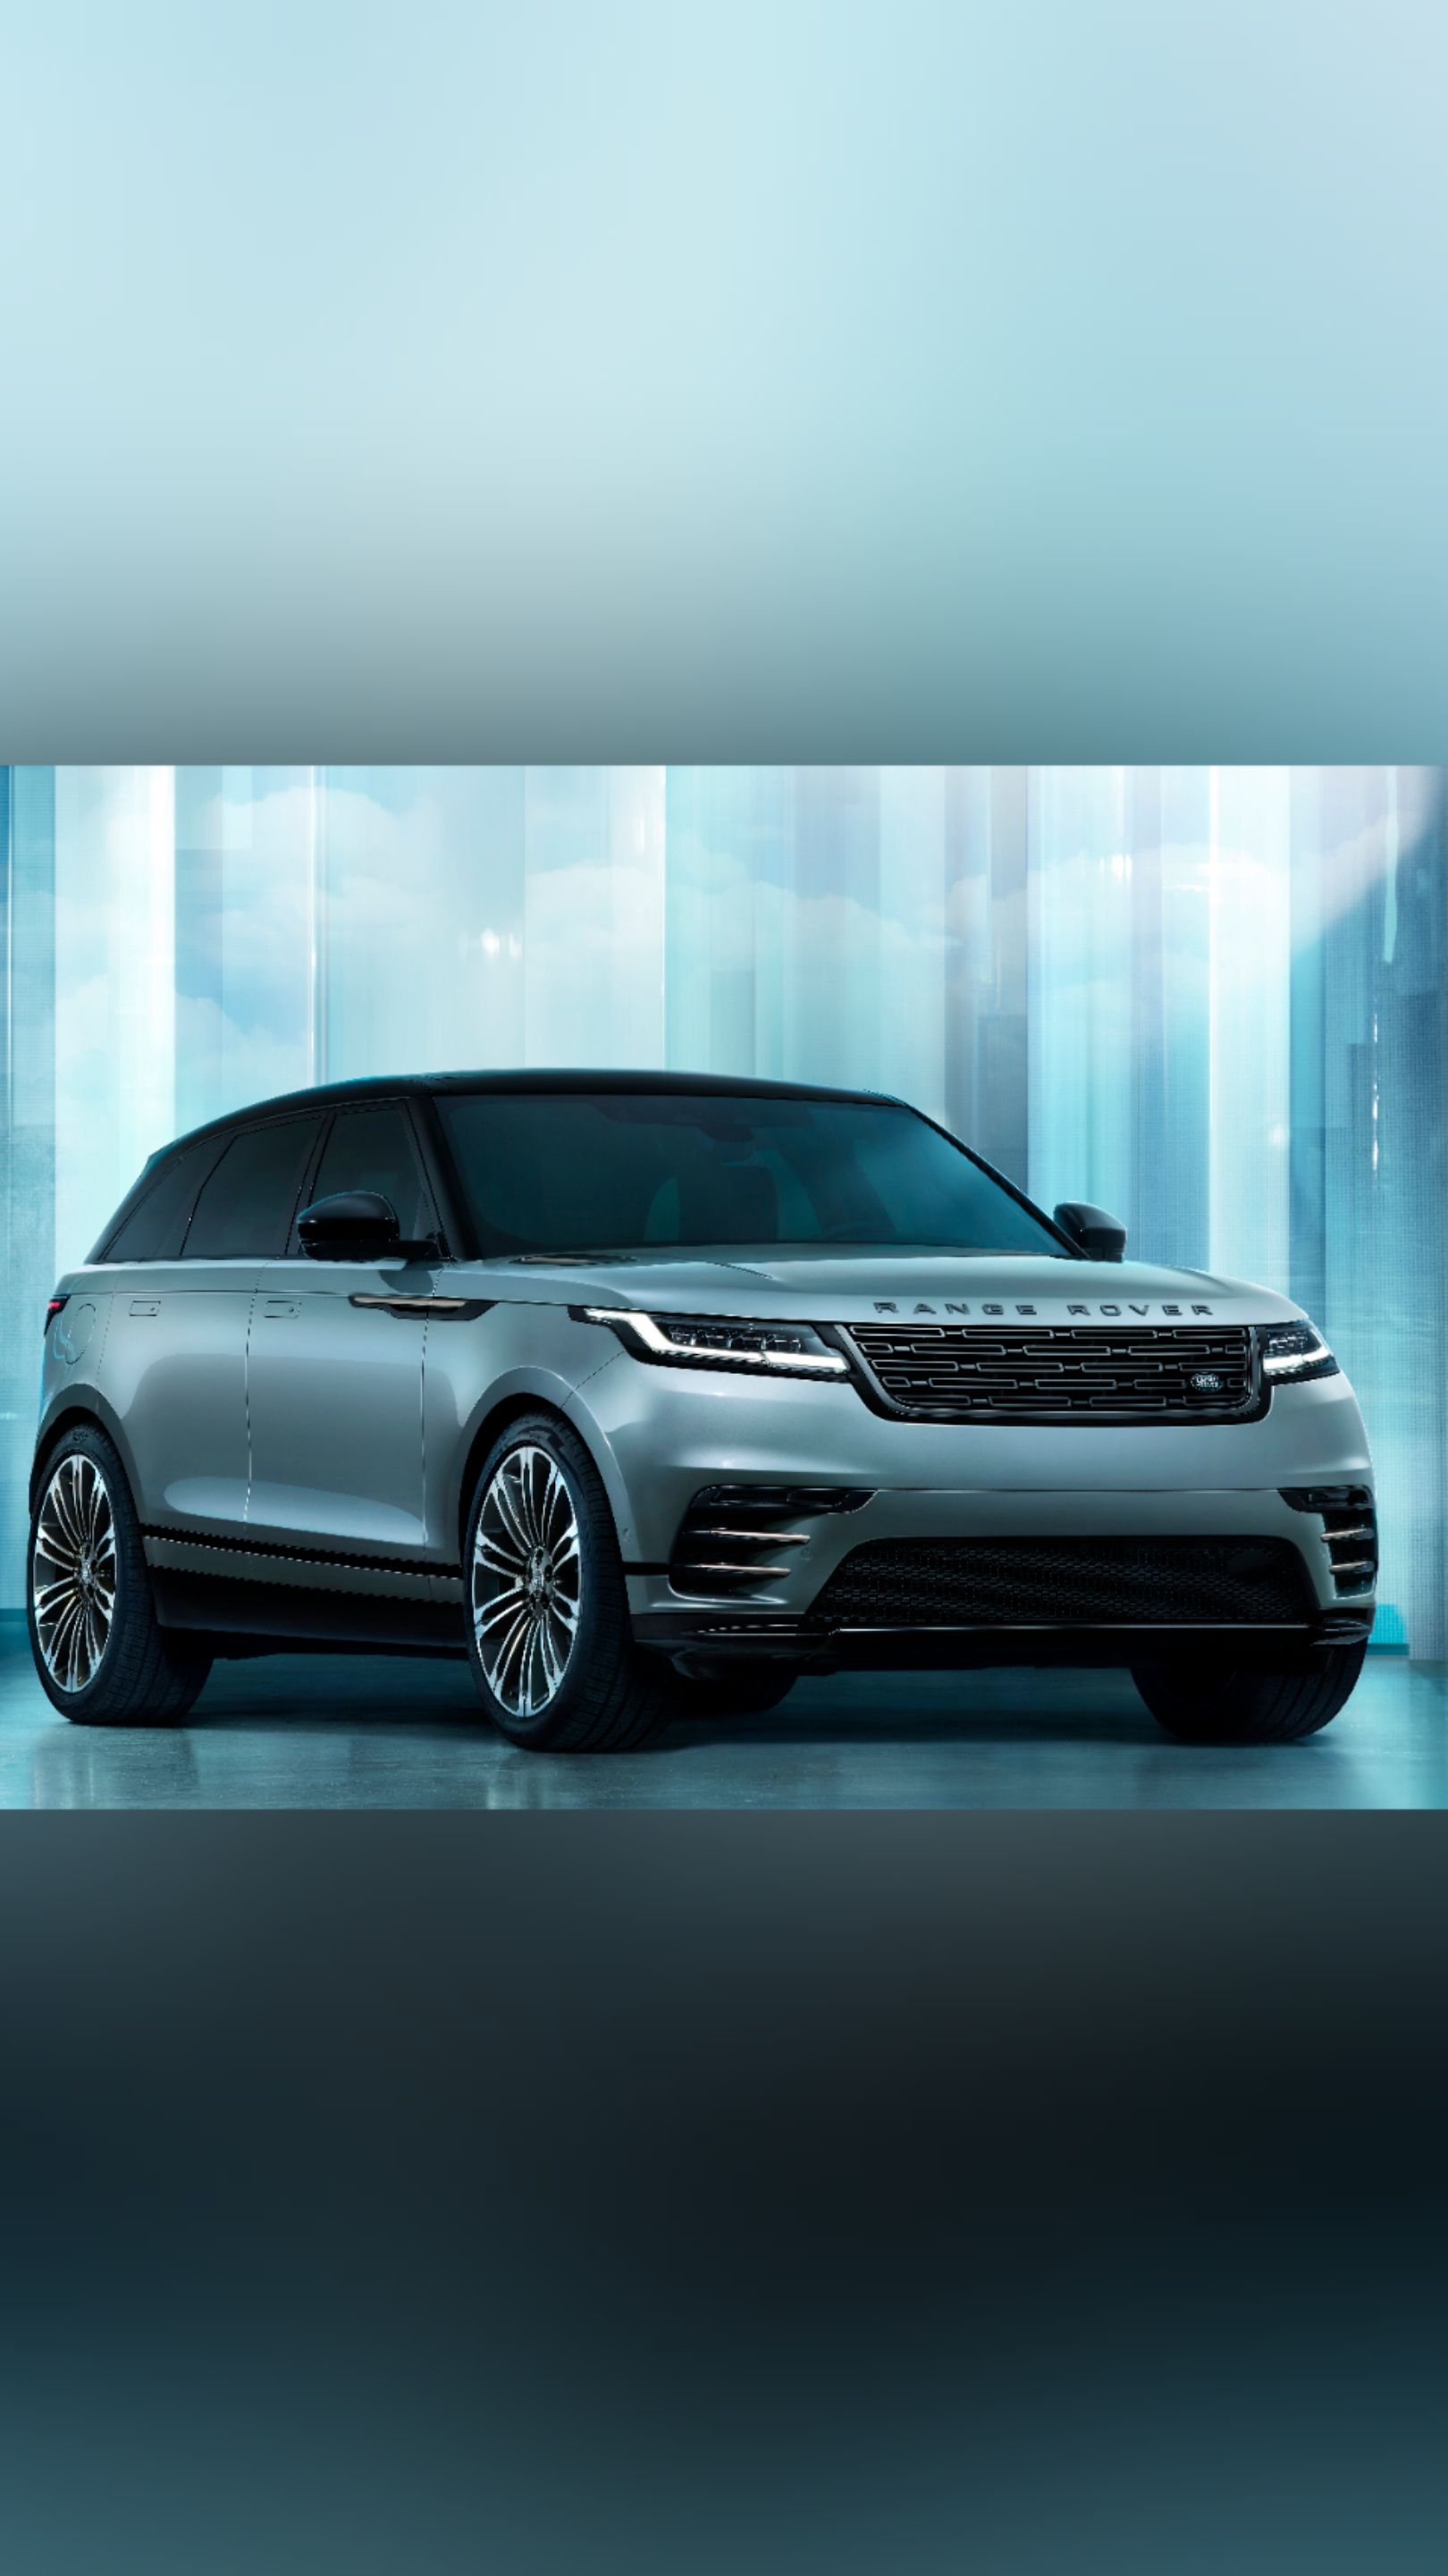 Customers can now reserve the 2023 Range Rover Velar